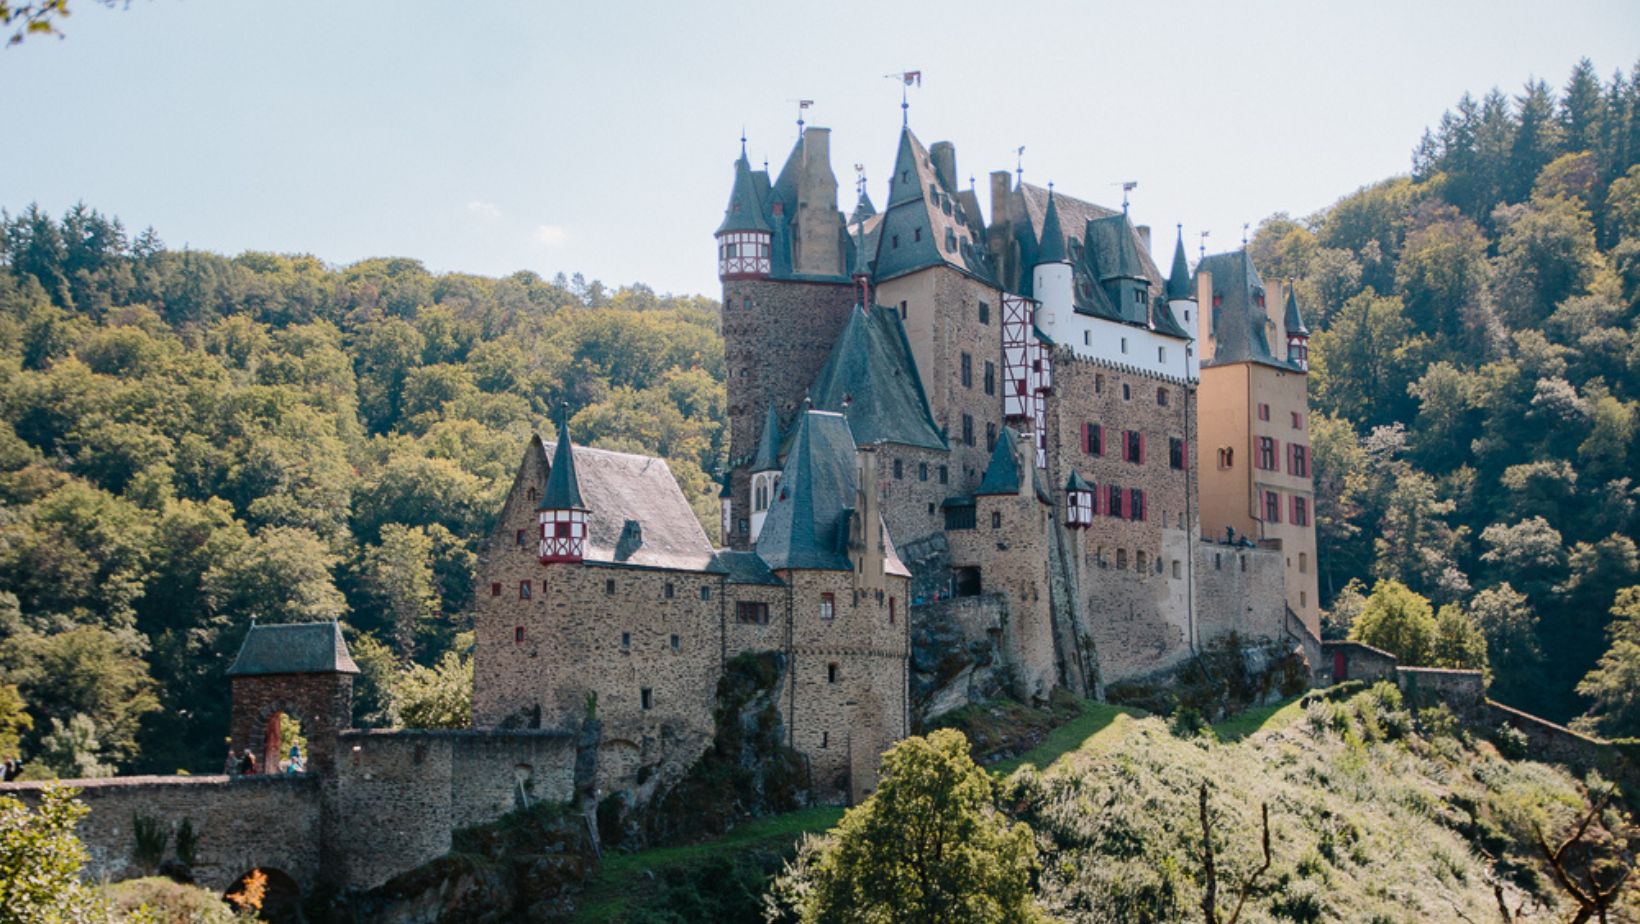 Eltz Castle History and Ownership